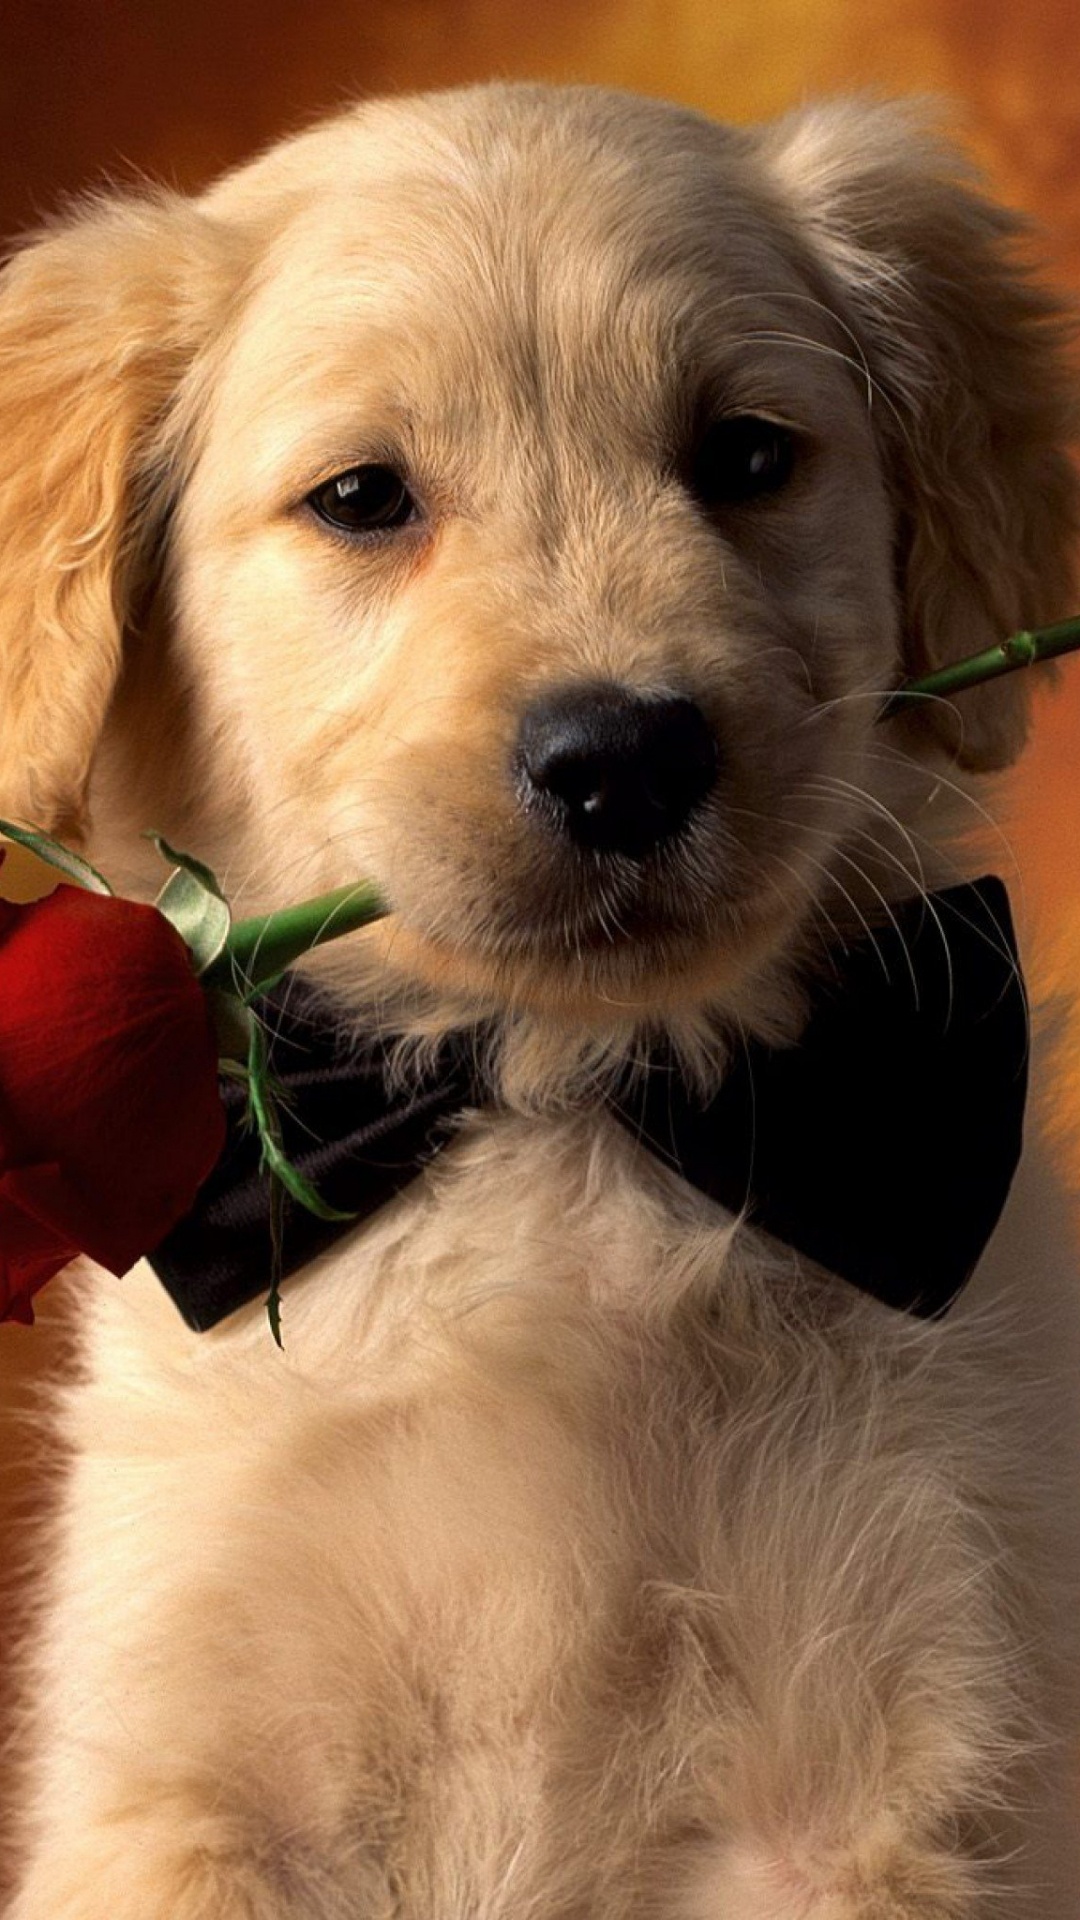 White Short Coated Dog With Red Rose on Head. Wallpaper in 1080x1920 Resolution